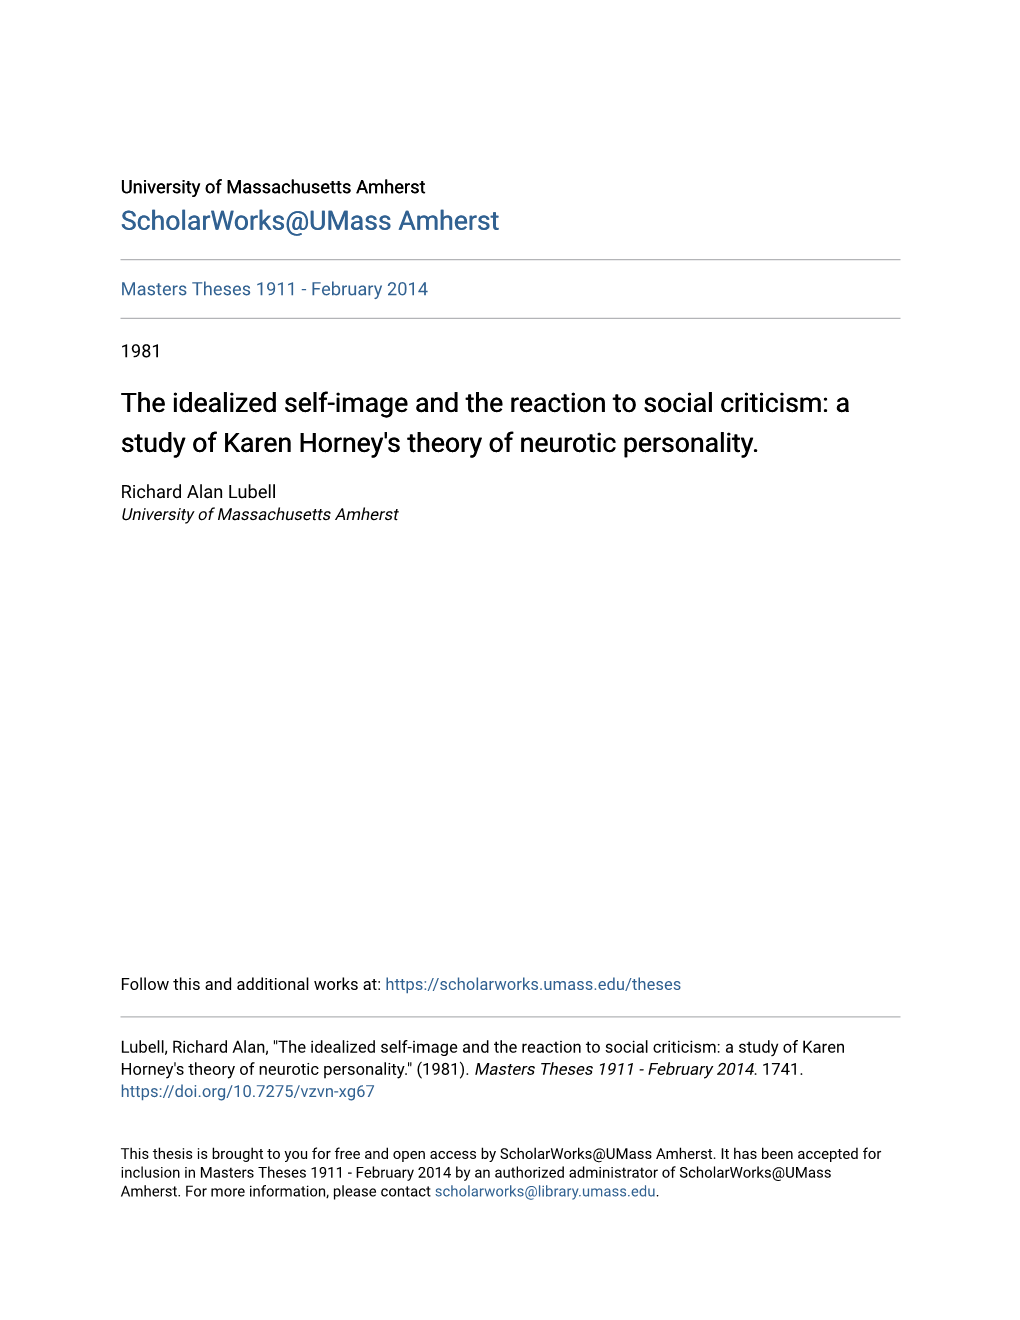 The Idealized Self-Image and the Reaction to Social Criticism: a Study of Karen Horney's Theory of Neurotic Personality